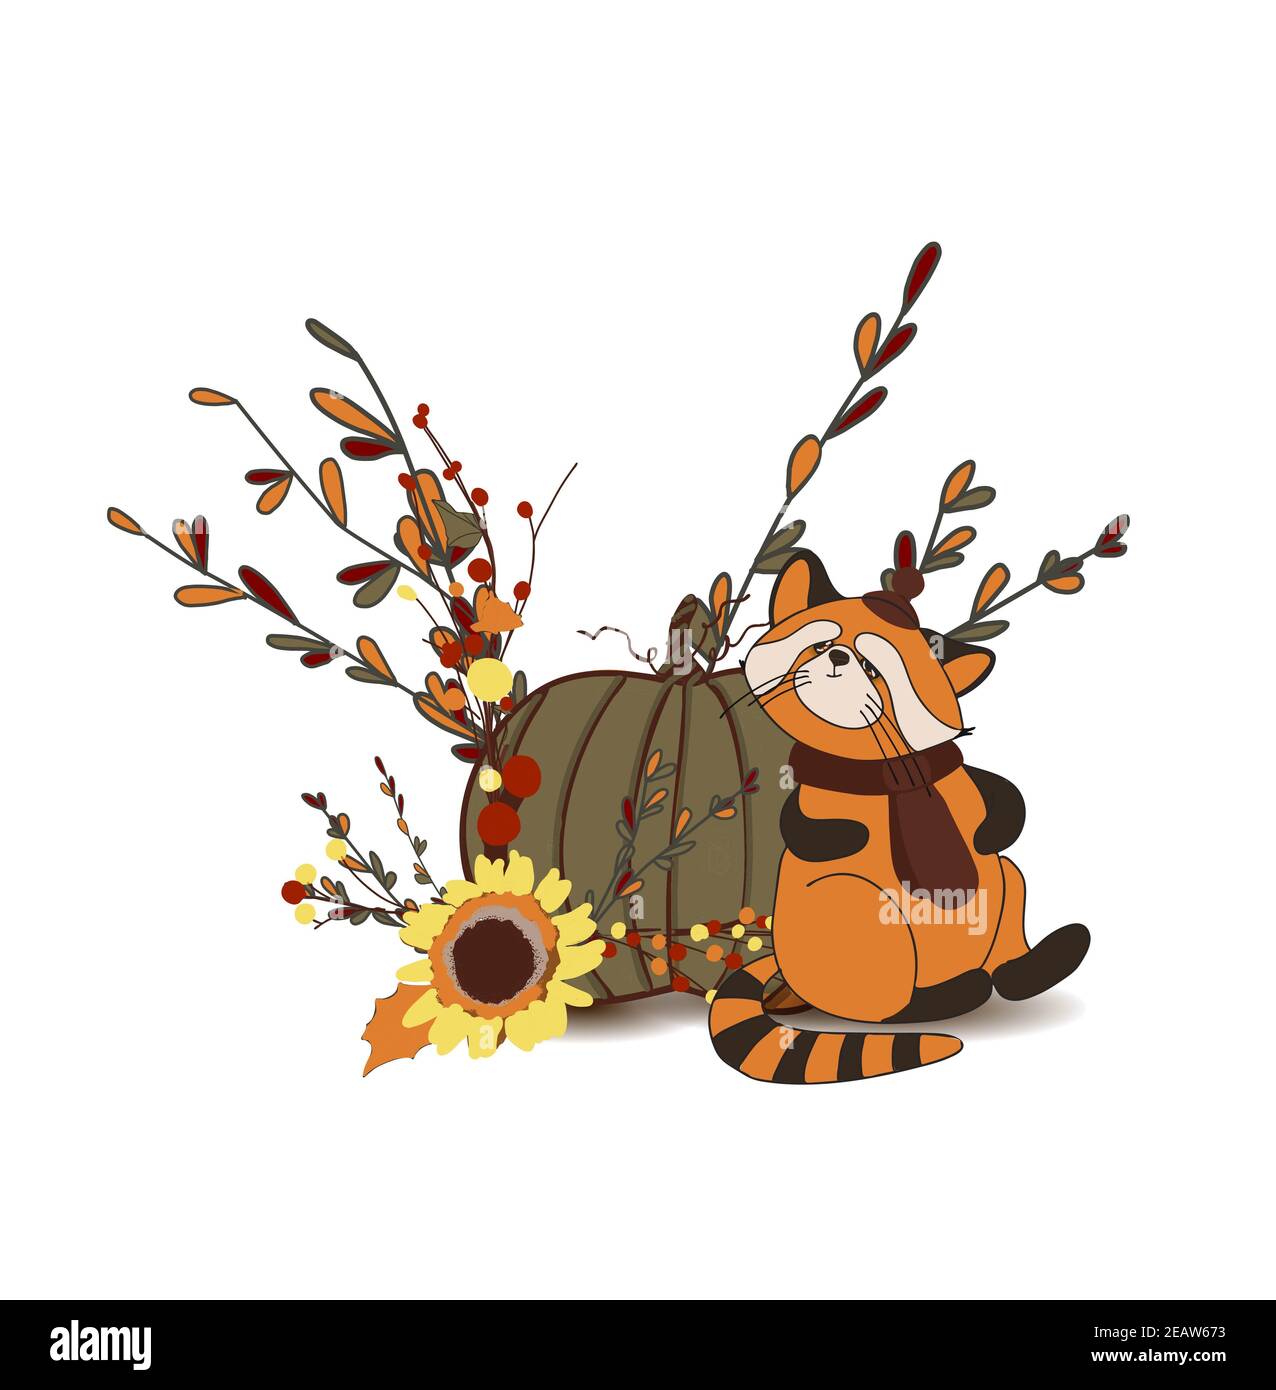 Autumn composition. Pumpkin and autumn twigs isolated on white background. Red panda character. Cute animals in a ha Stock Photo